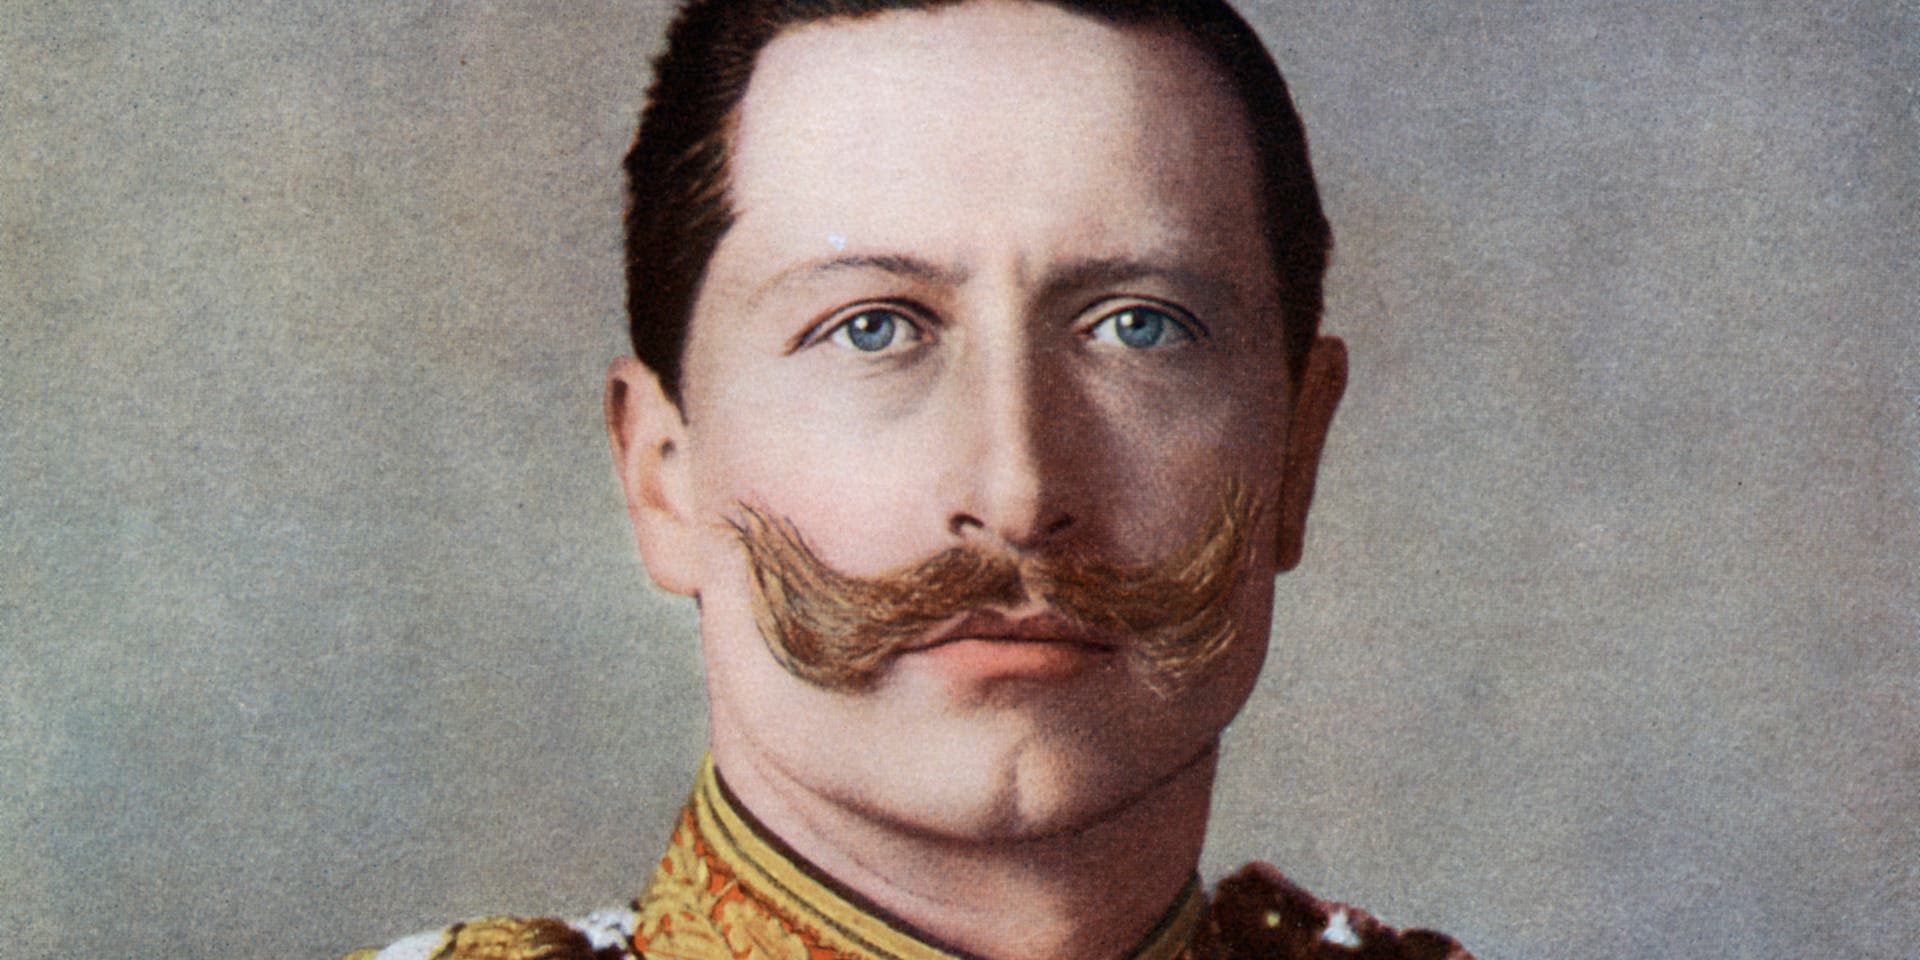 Kaiser Wilhelm II, Emperor of Germany and King of Prussia, late 19th-early 20th century. Wilhelm (1859-1941), was the last German emperor and king of Prussia.